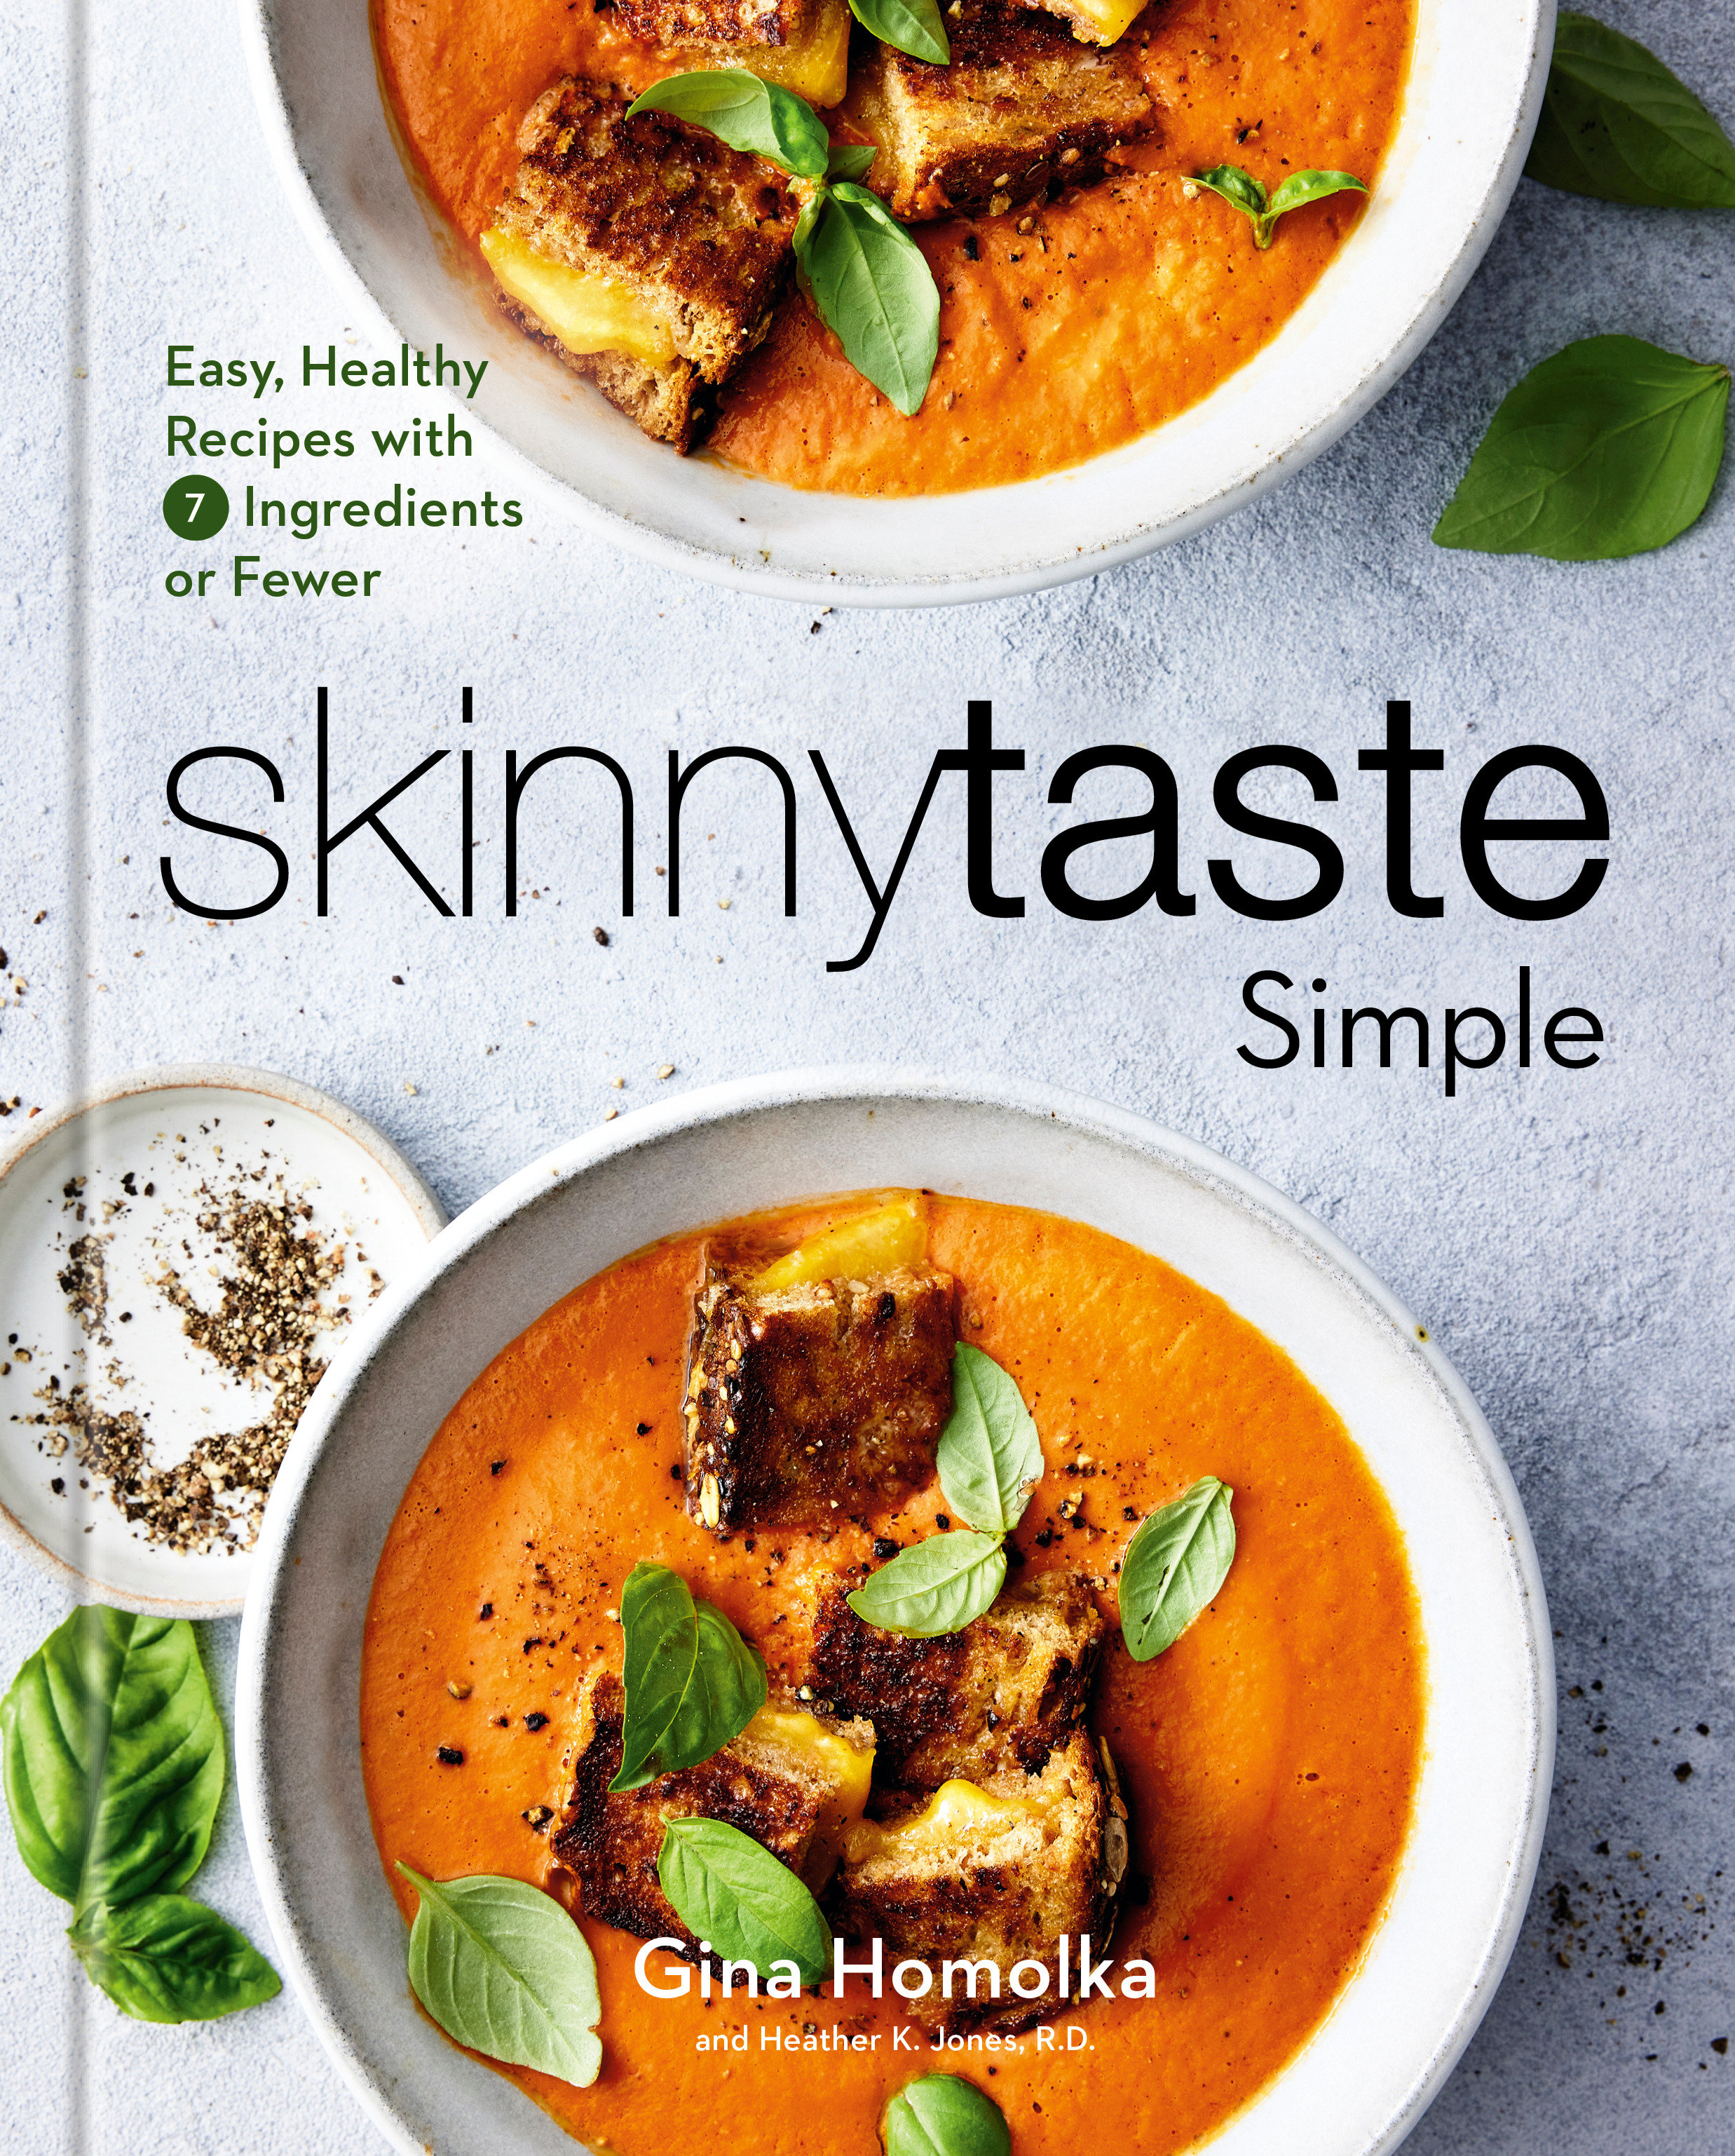 Skinnytaste Simple Easy, Healthy Recipes with 7 Ingredients or Fewer: A Cookbook cover image